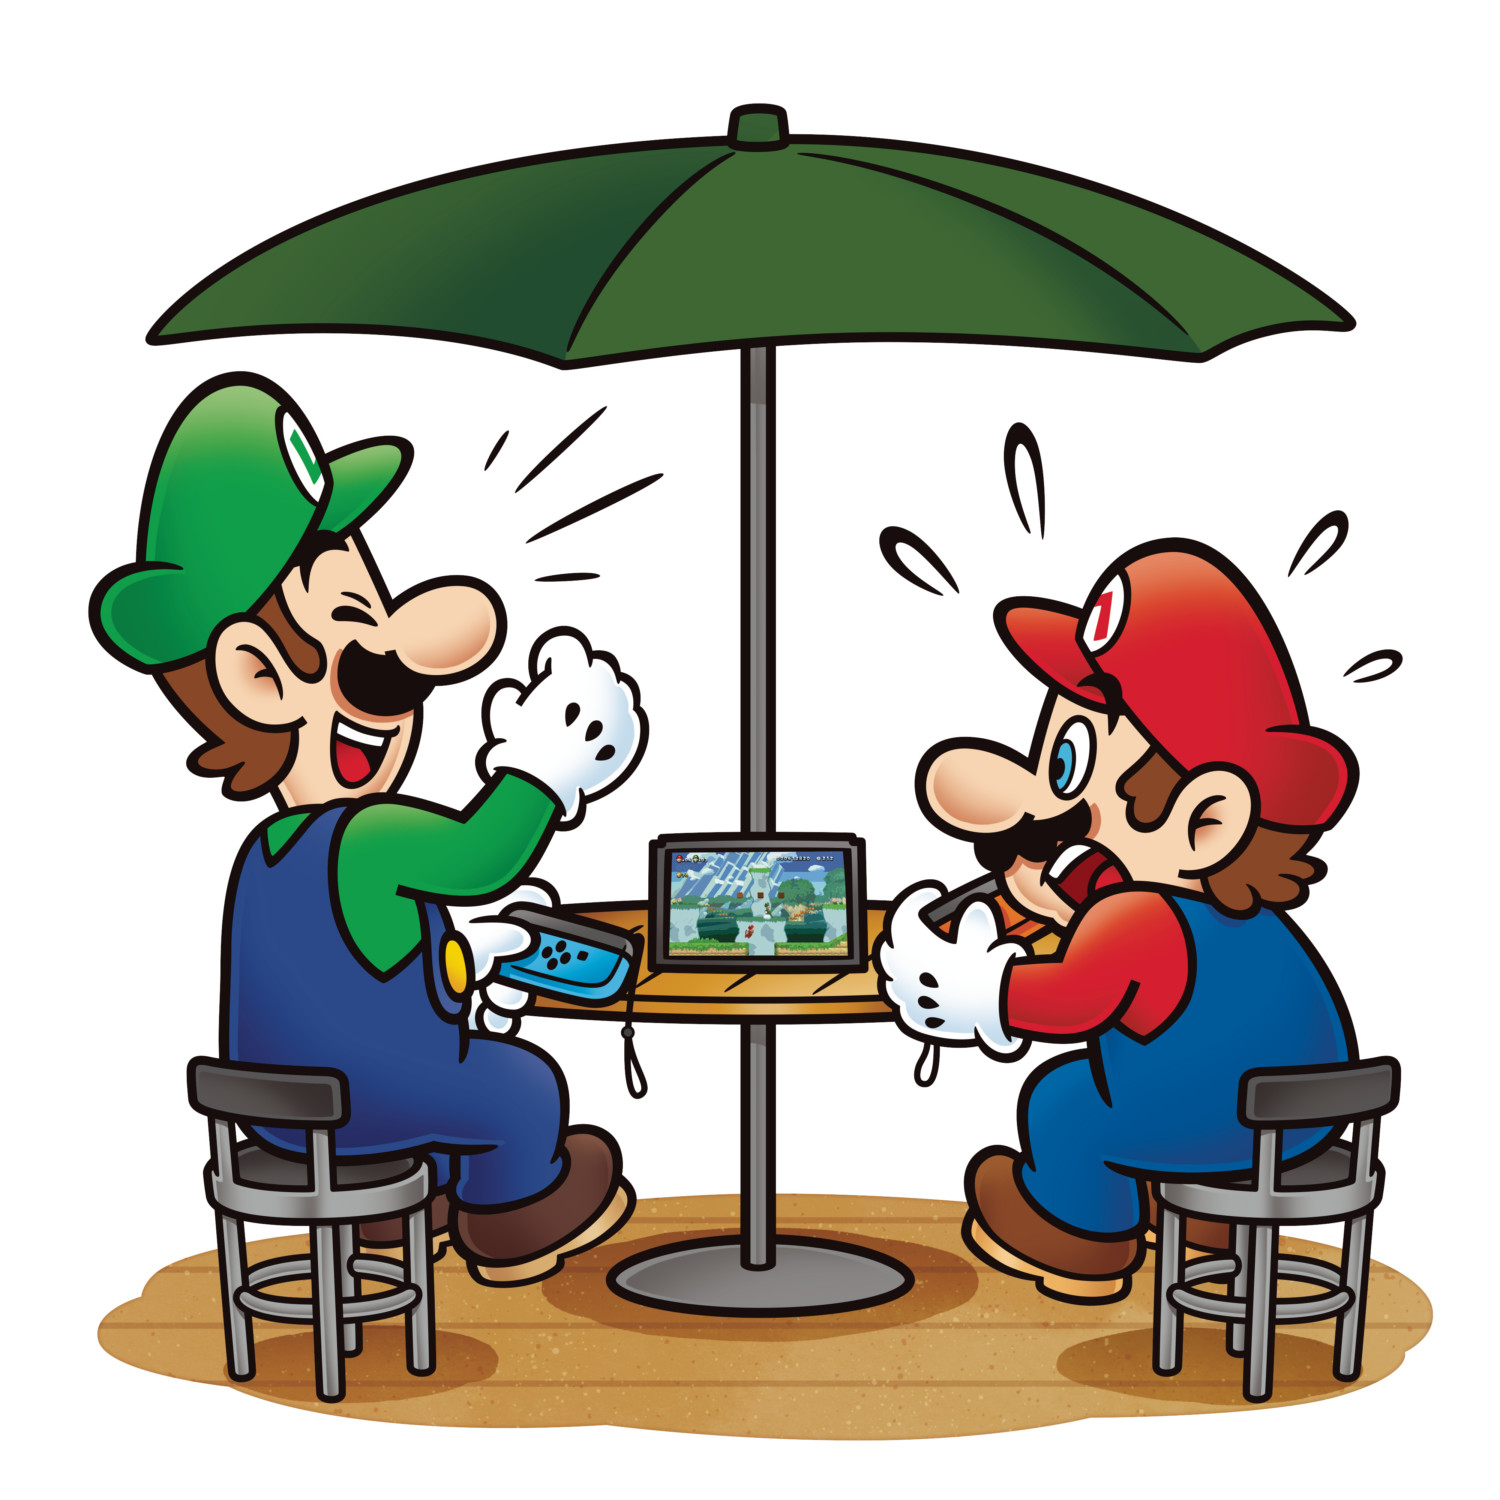 Gallery All Artwork And Screenshots For New Super Mario Bros U Deluxe Nintendosoup 2963